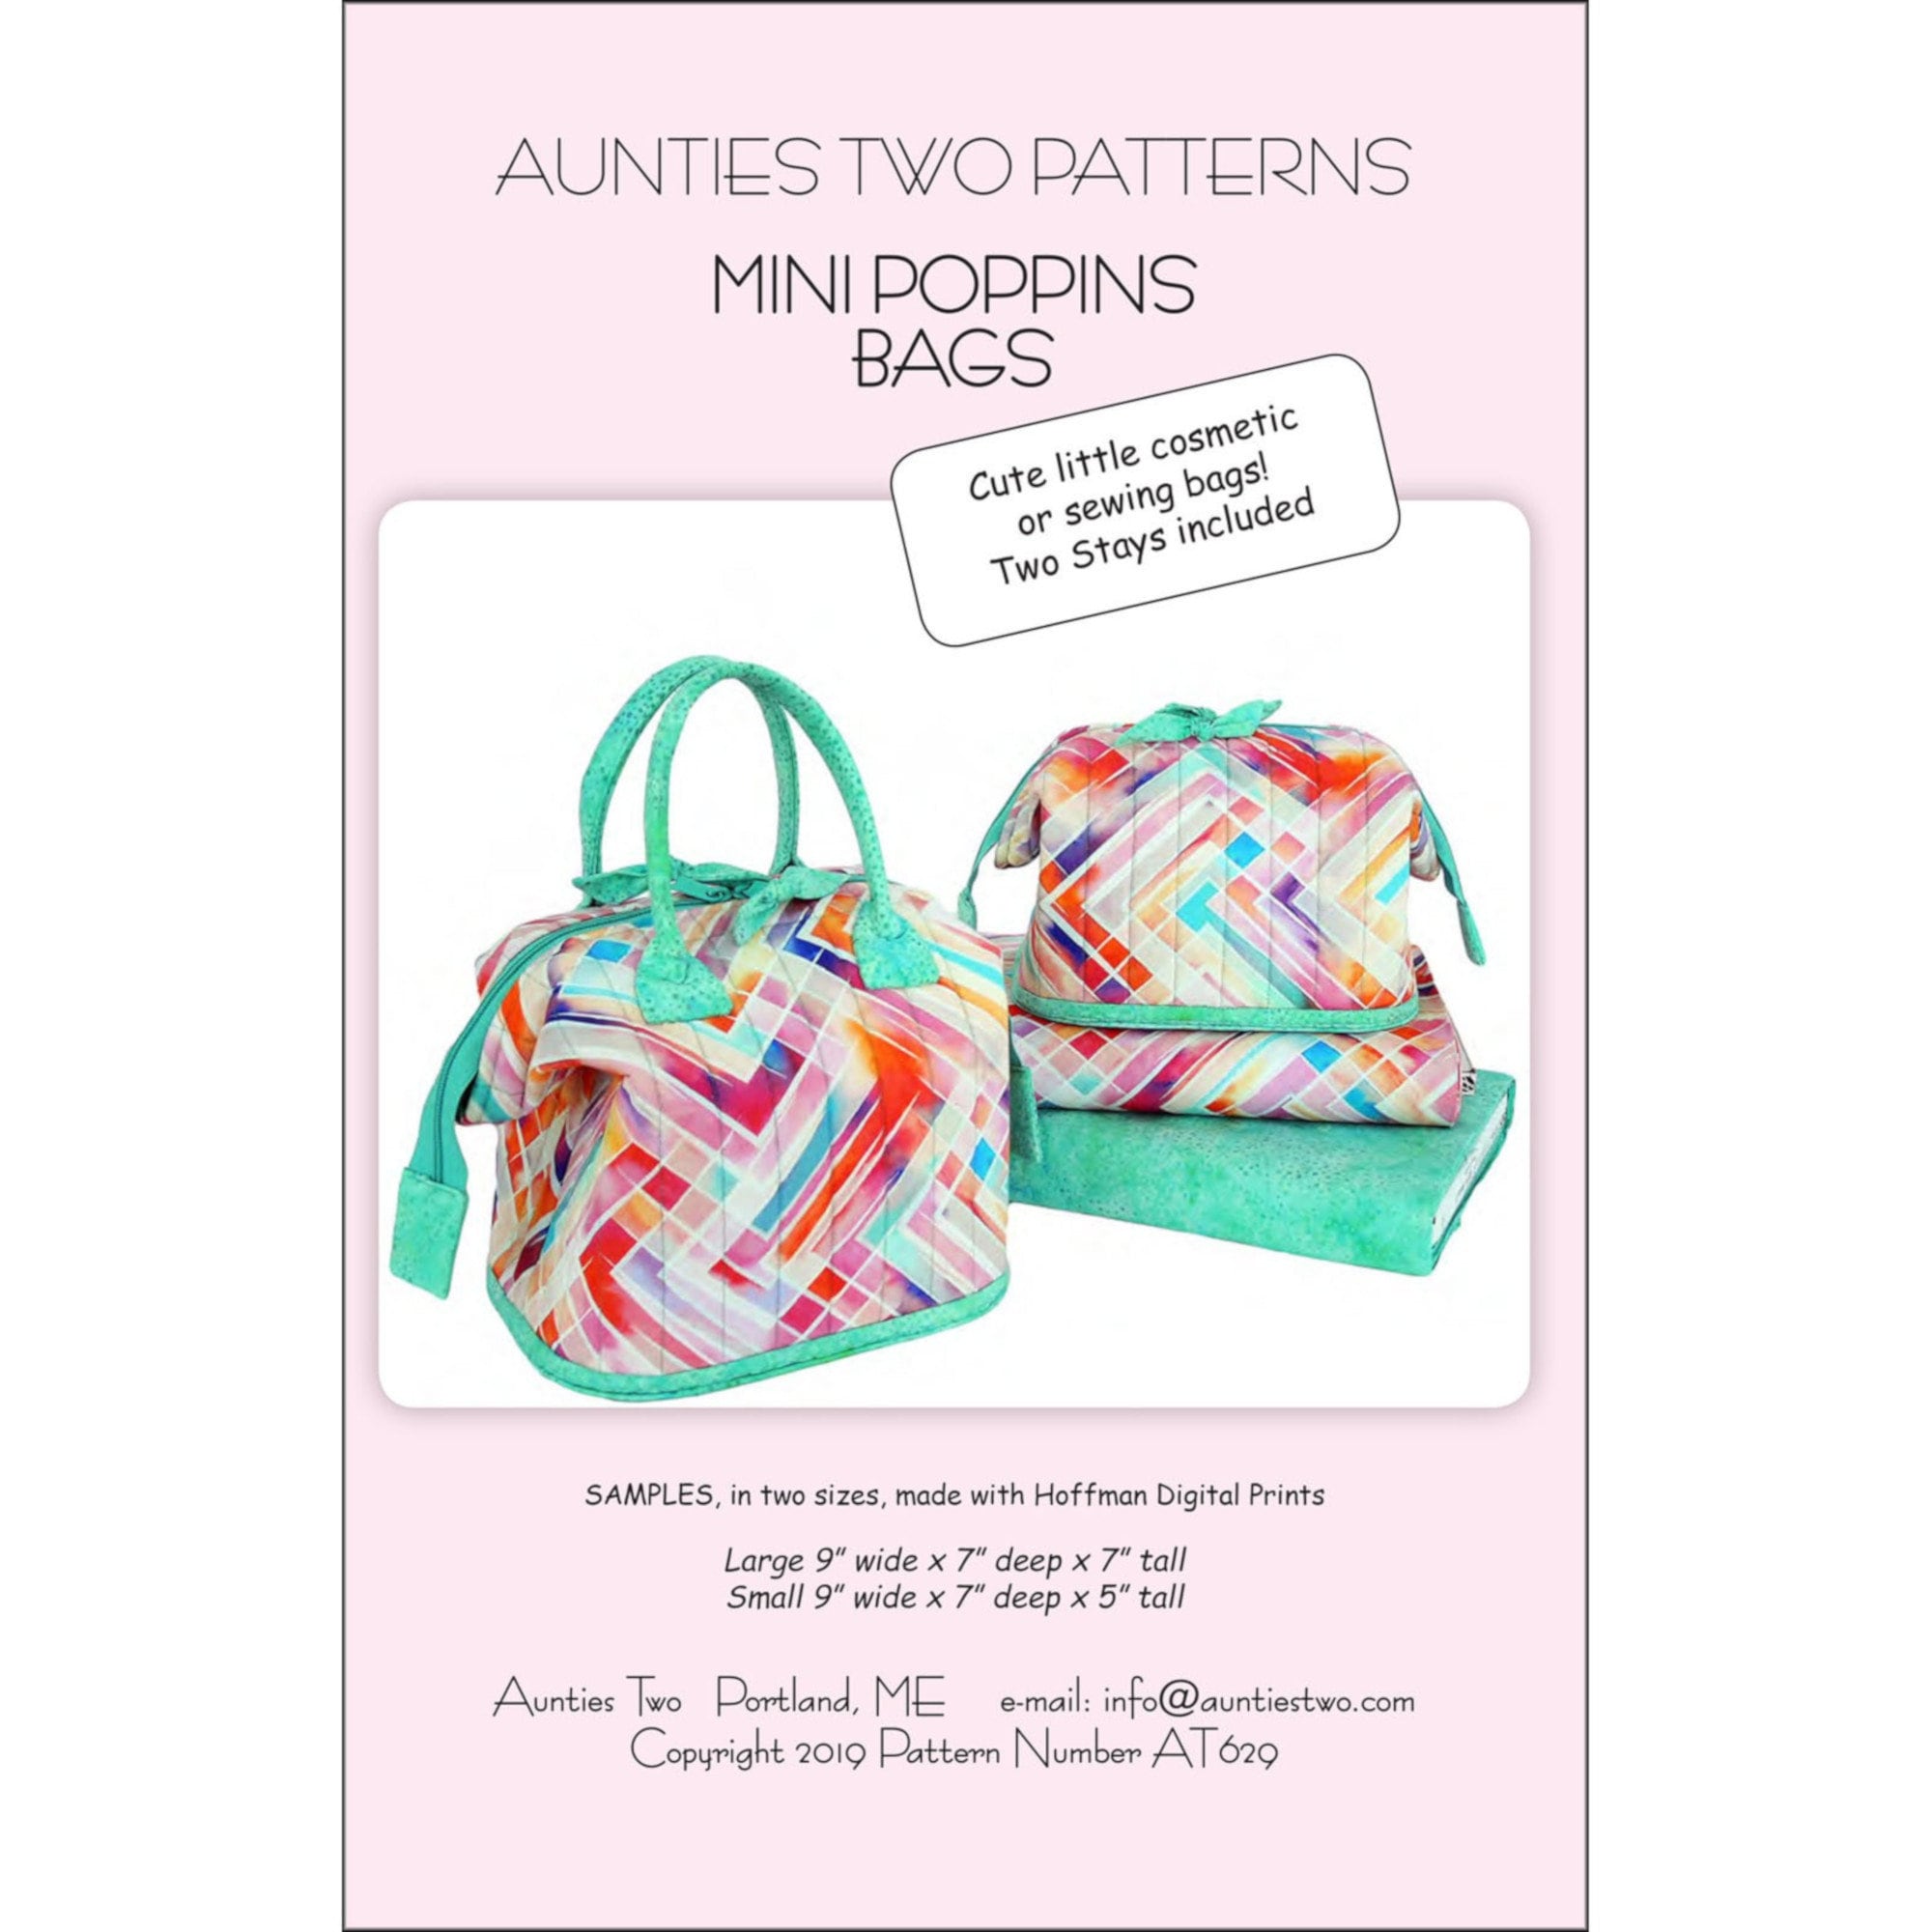 Bag Making  Kits  Poppins Bag Stays by Aunties Two